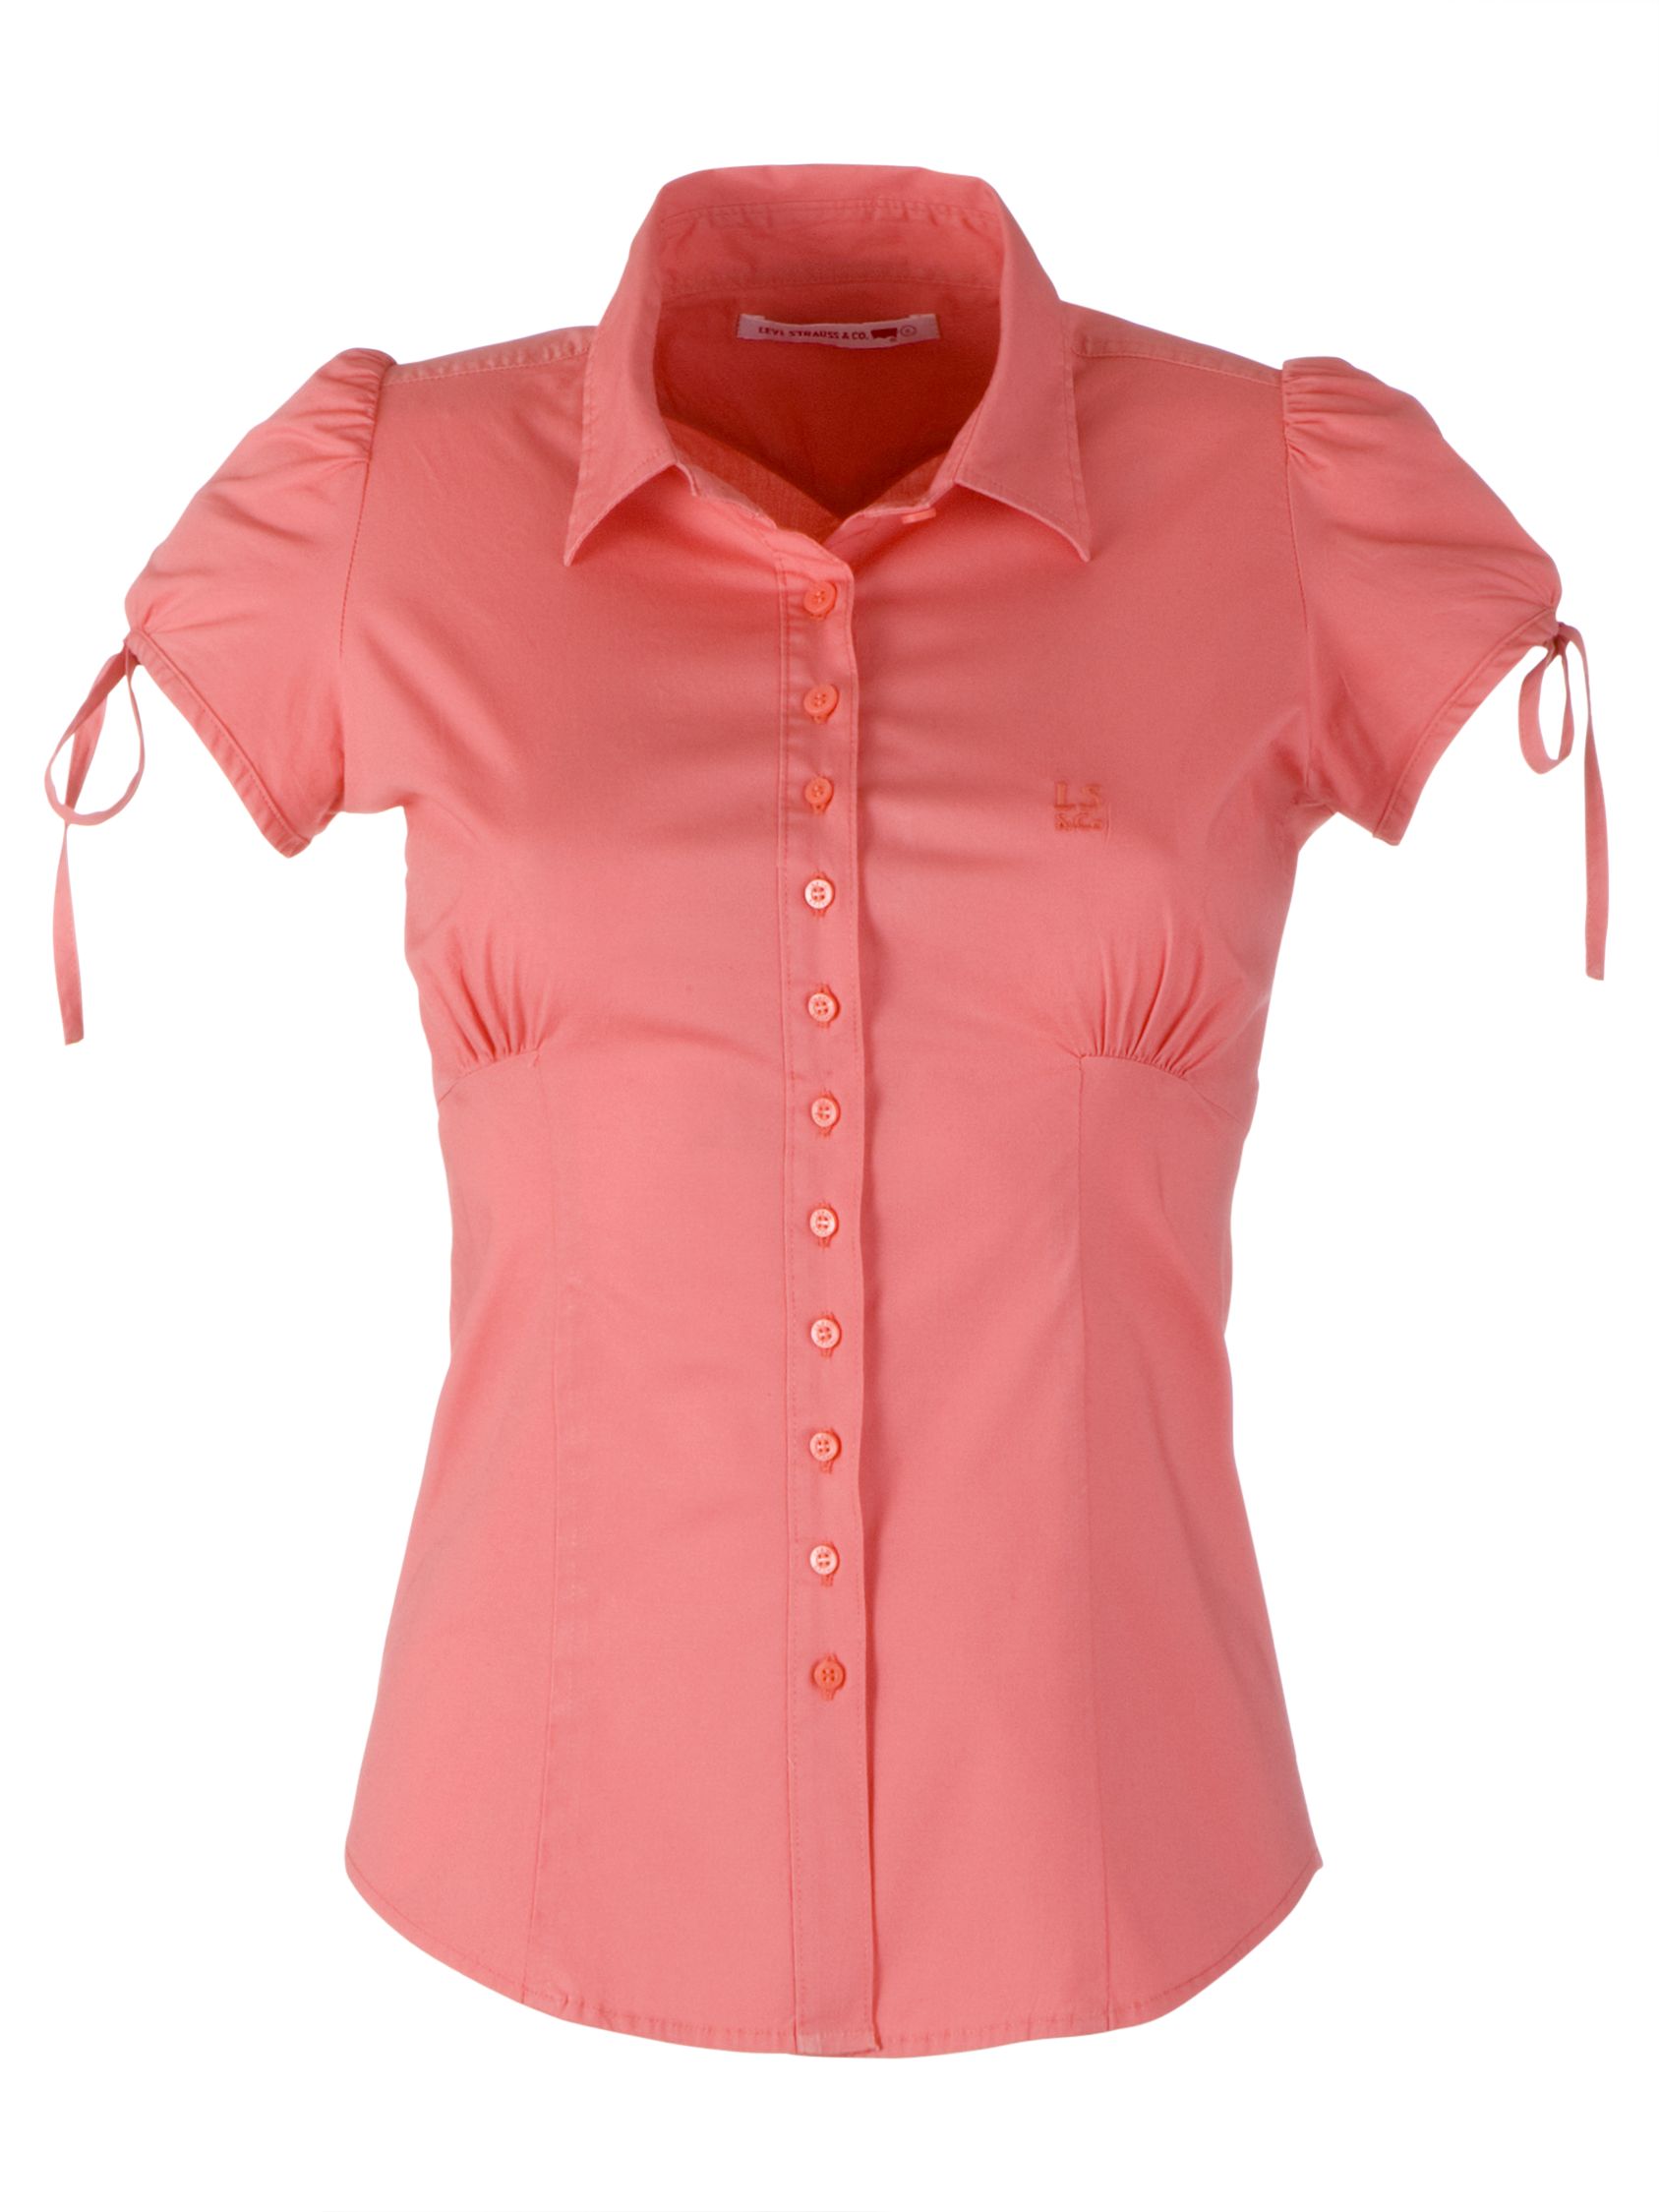 Cap and Bow Sleeve Blouse, Pink, Medium